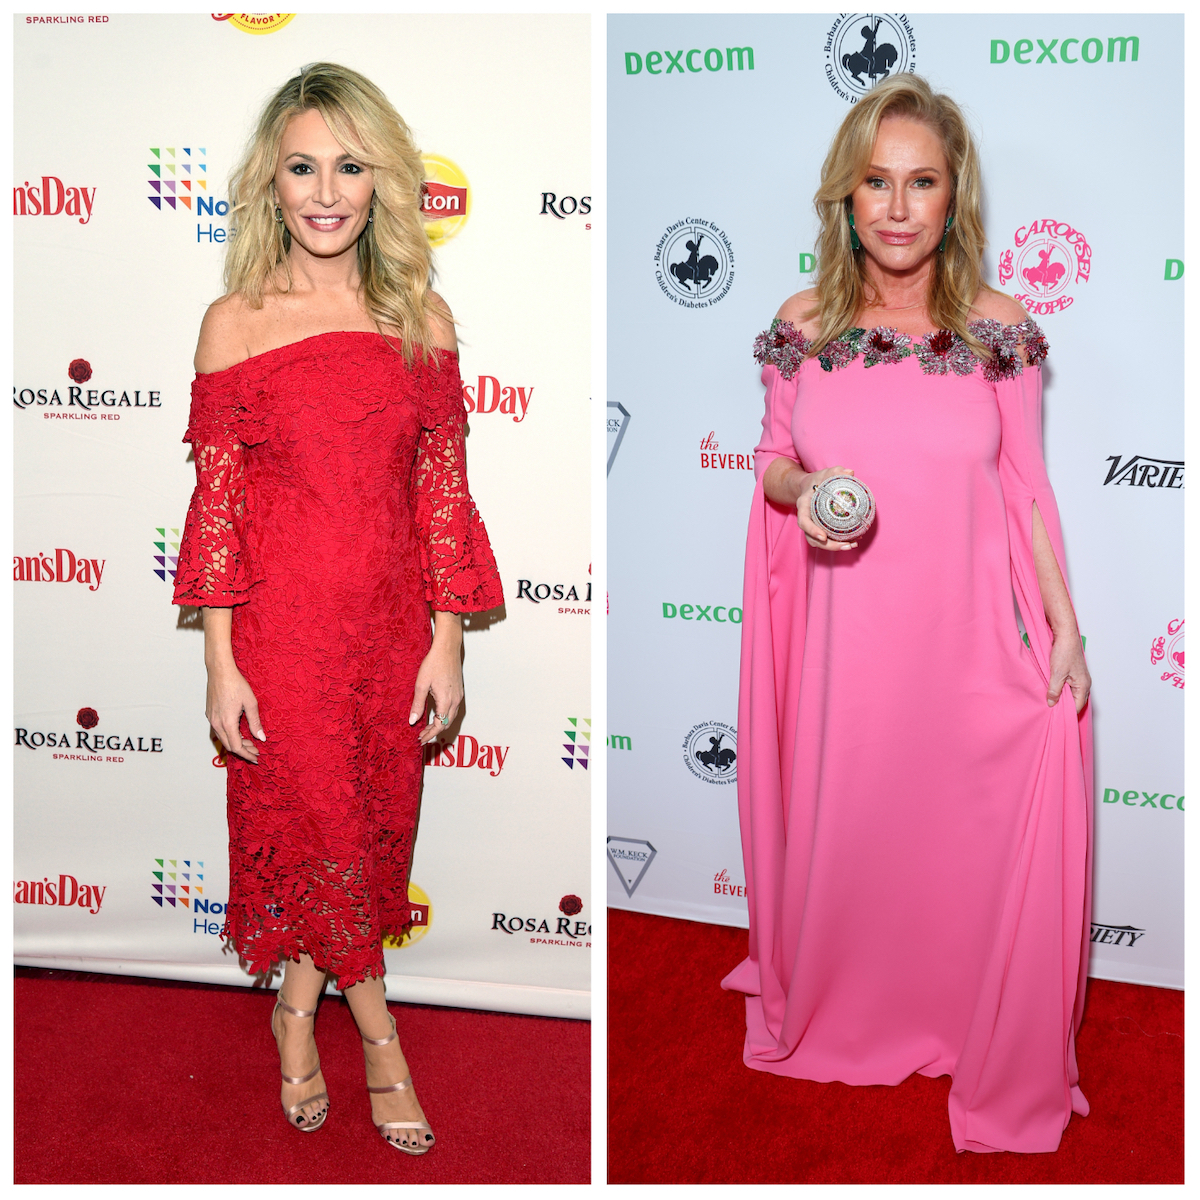 Kate Chastain from 'Below Deck' and Kathy Hilton 'RHOBH' on separate red carpet events.